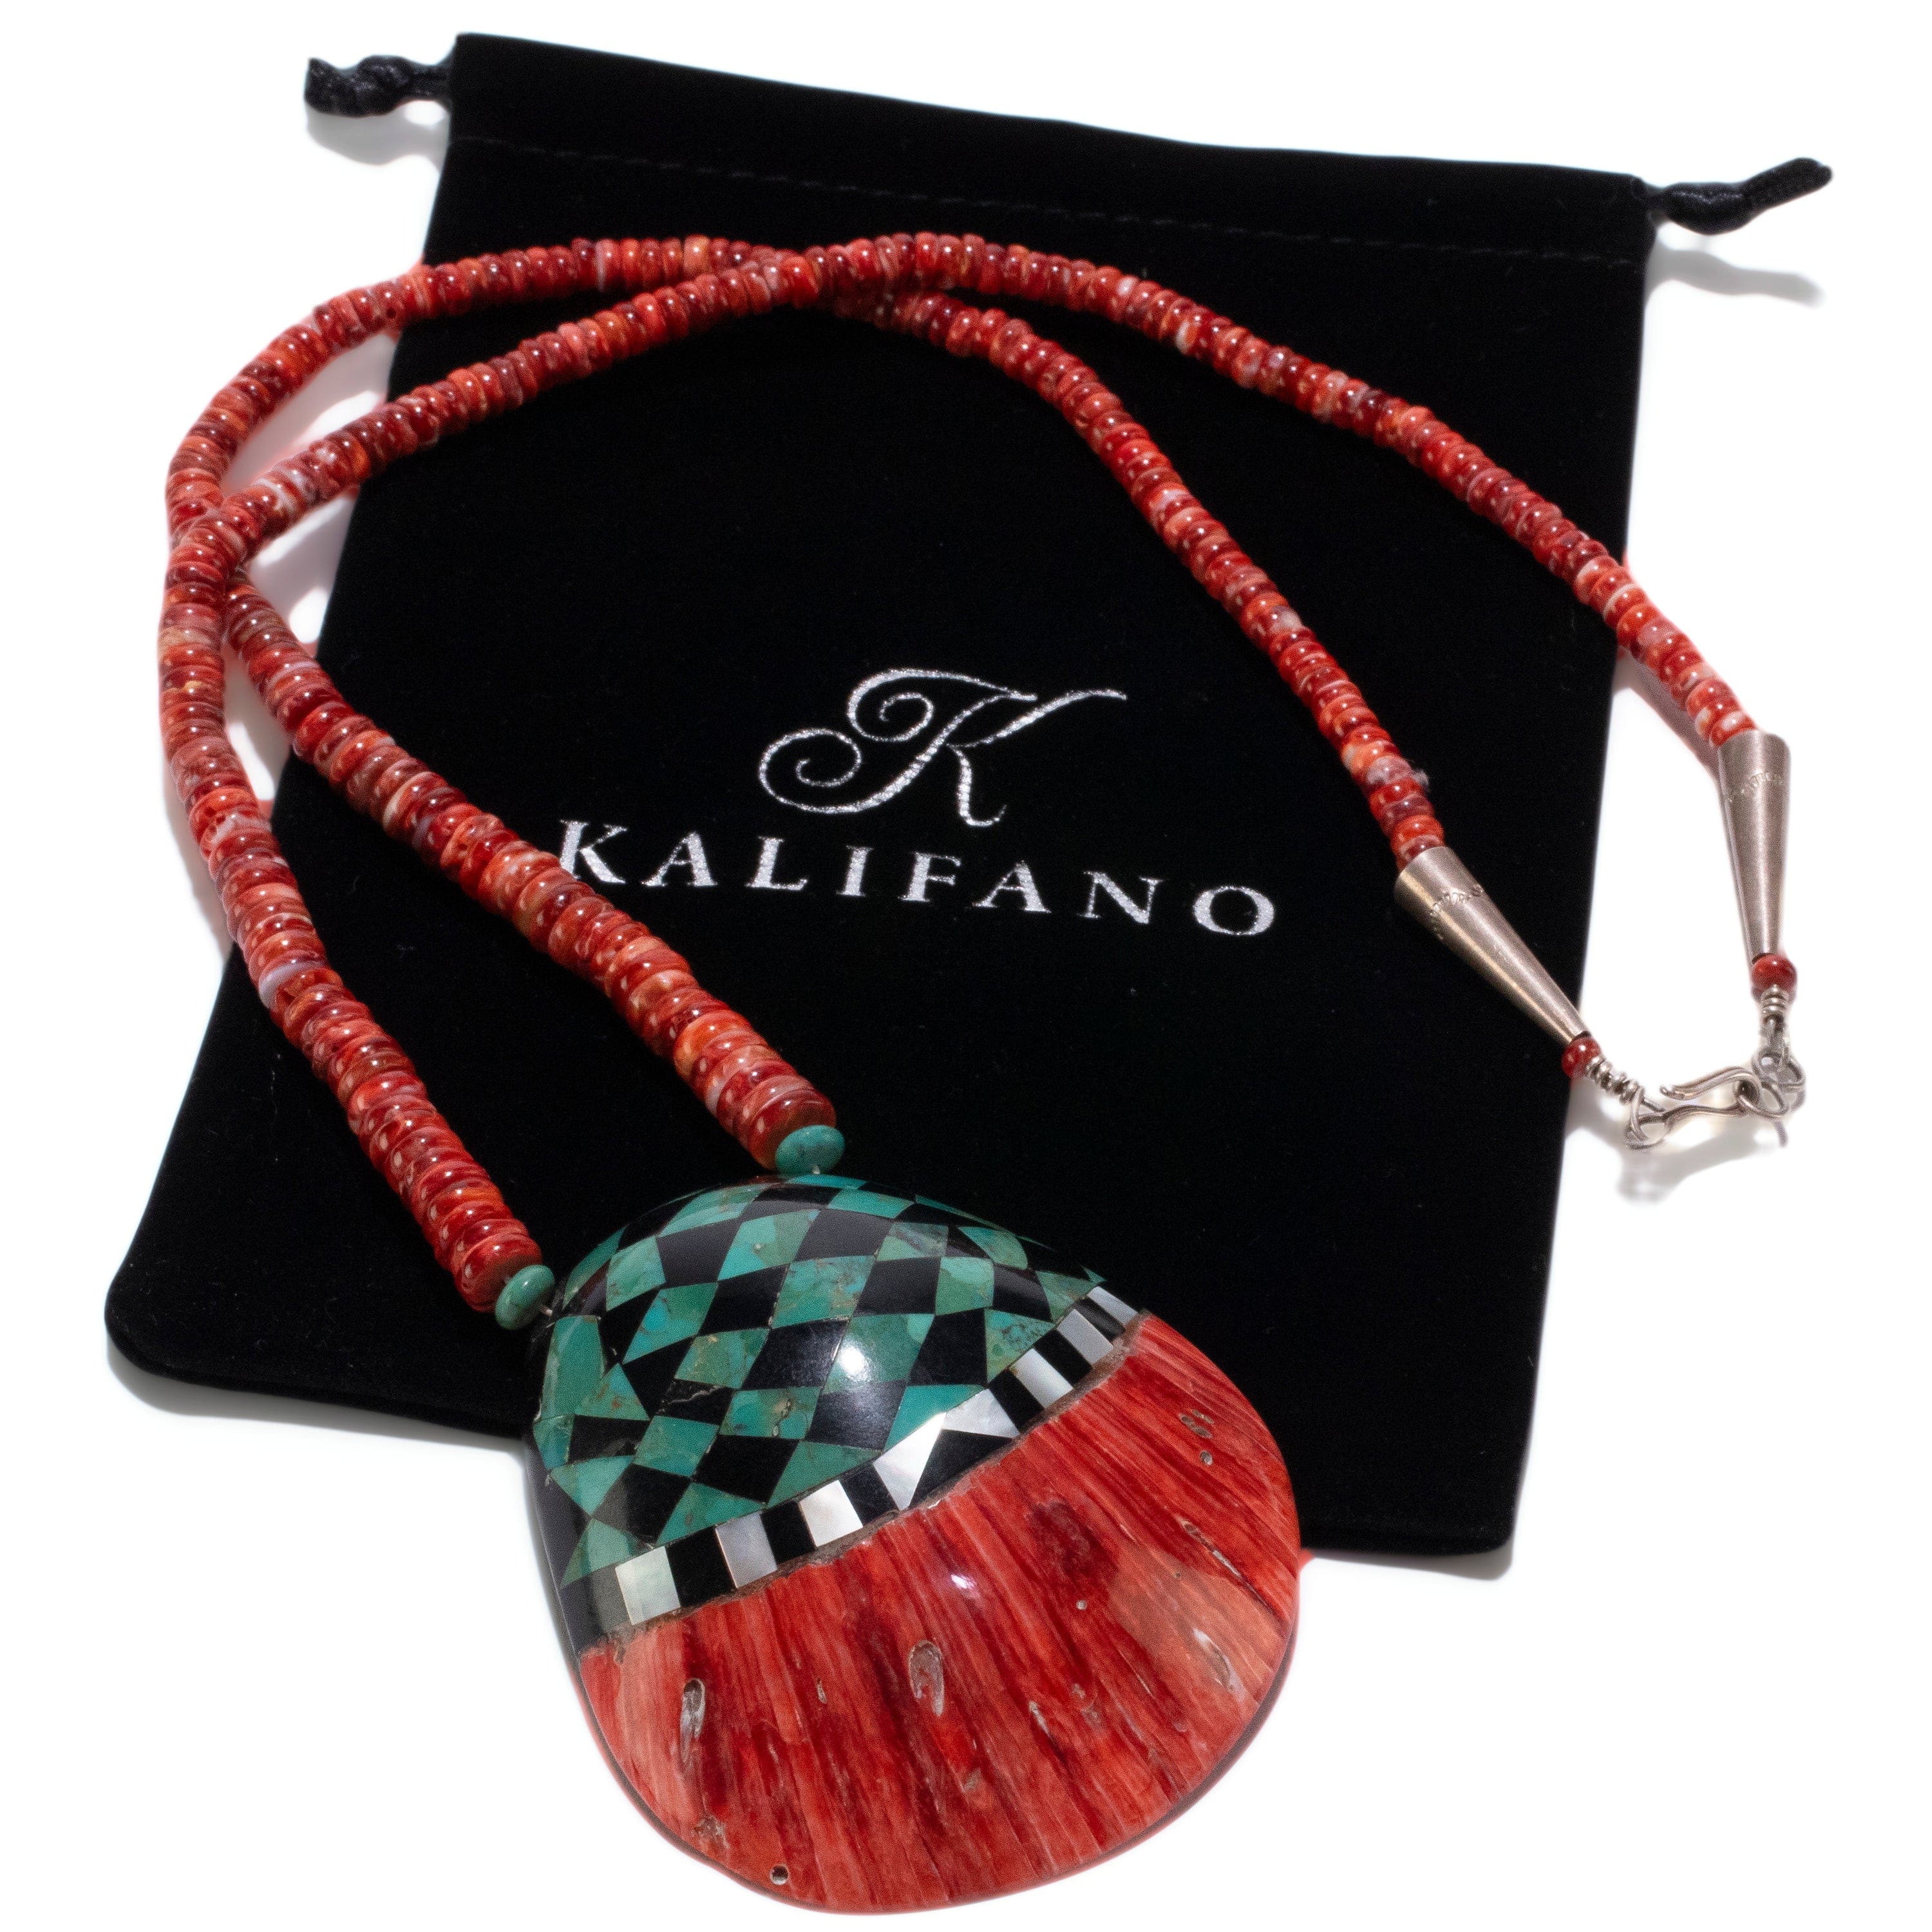 Kalifano Native American Jewelry 26" Red Spiny Oyster Shell with Turquoise, Mother of Pearl, and Black Onyx USA Native American Made 925 Sterling Silver Heishi Bead Necklace NAN1200.021